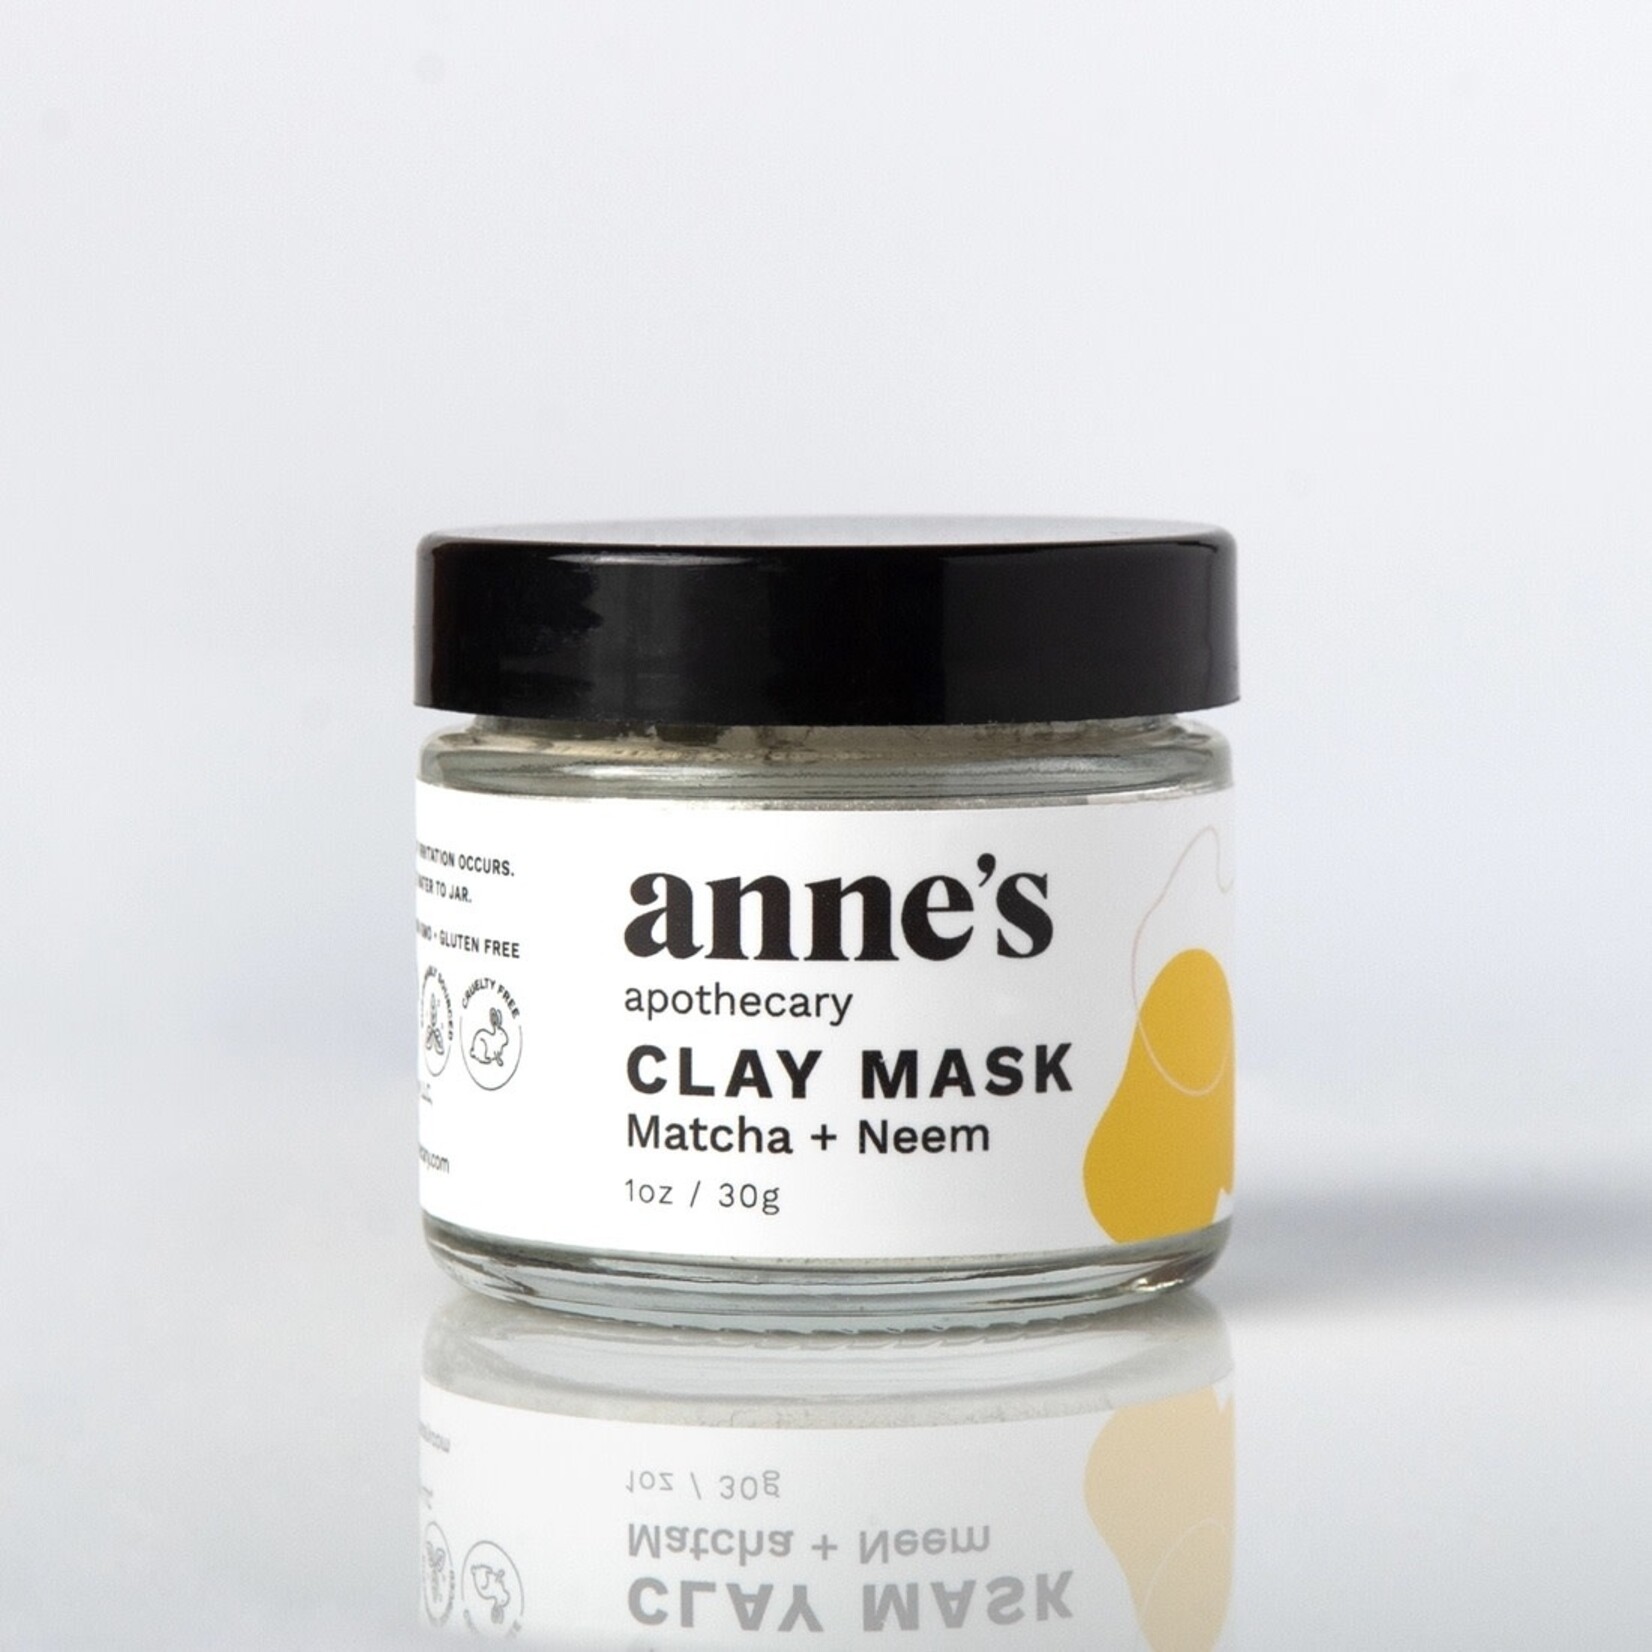 Annes Apothecary Mask Matcha + Neem